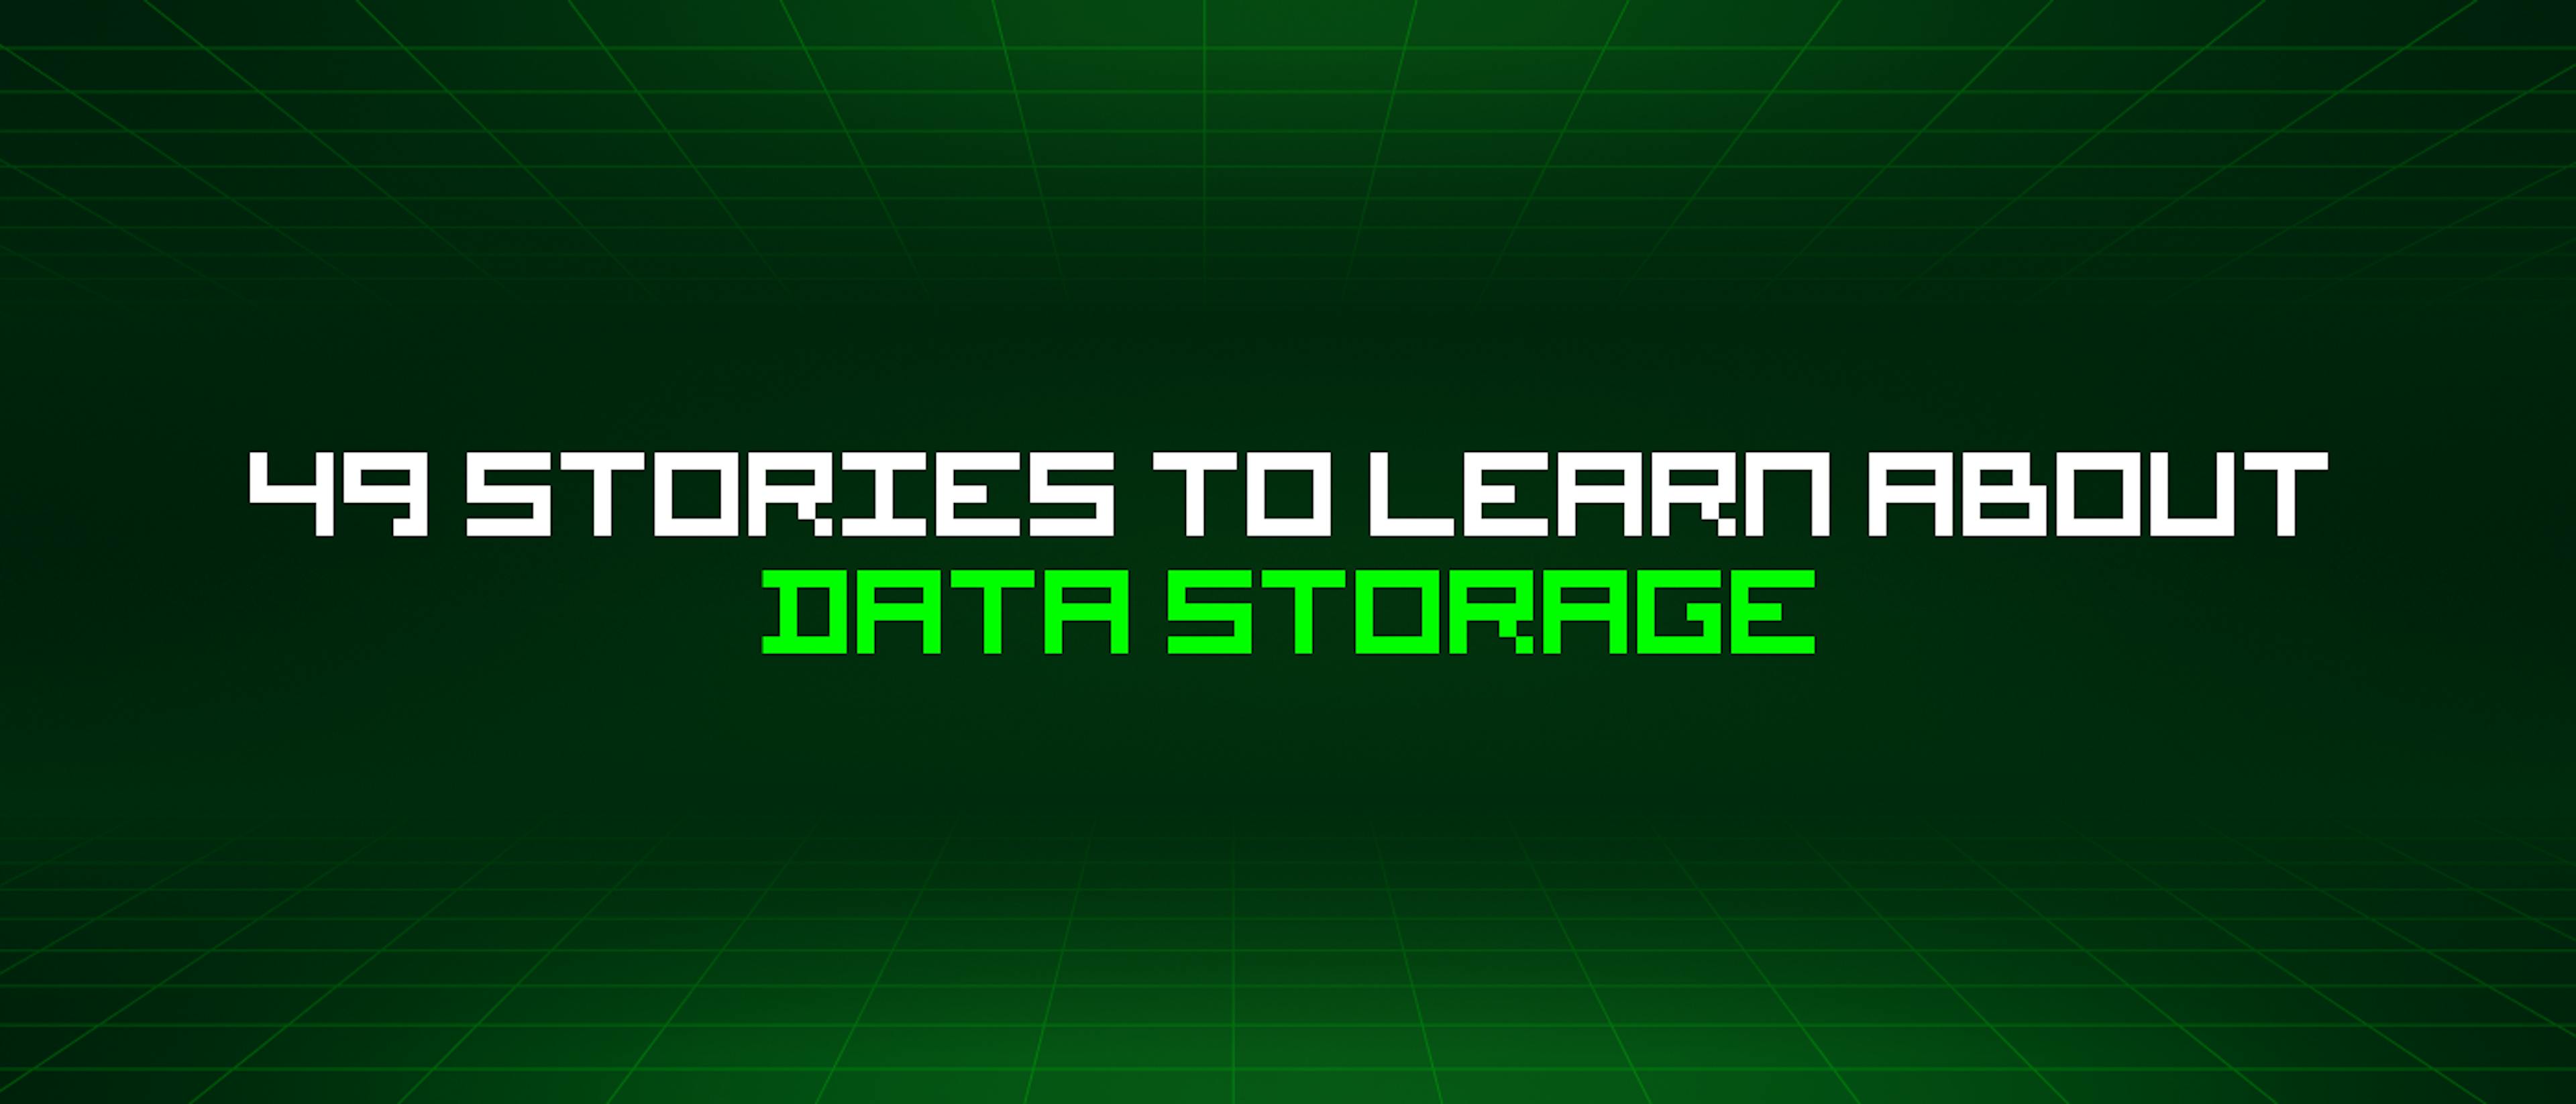 featured image - 49 Stories To Learn About Data Storage